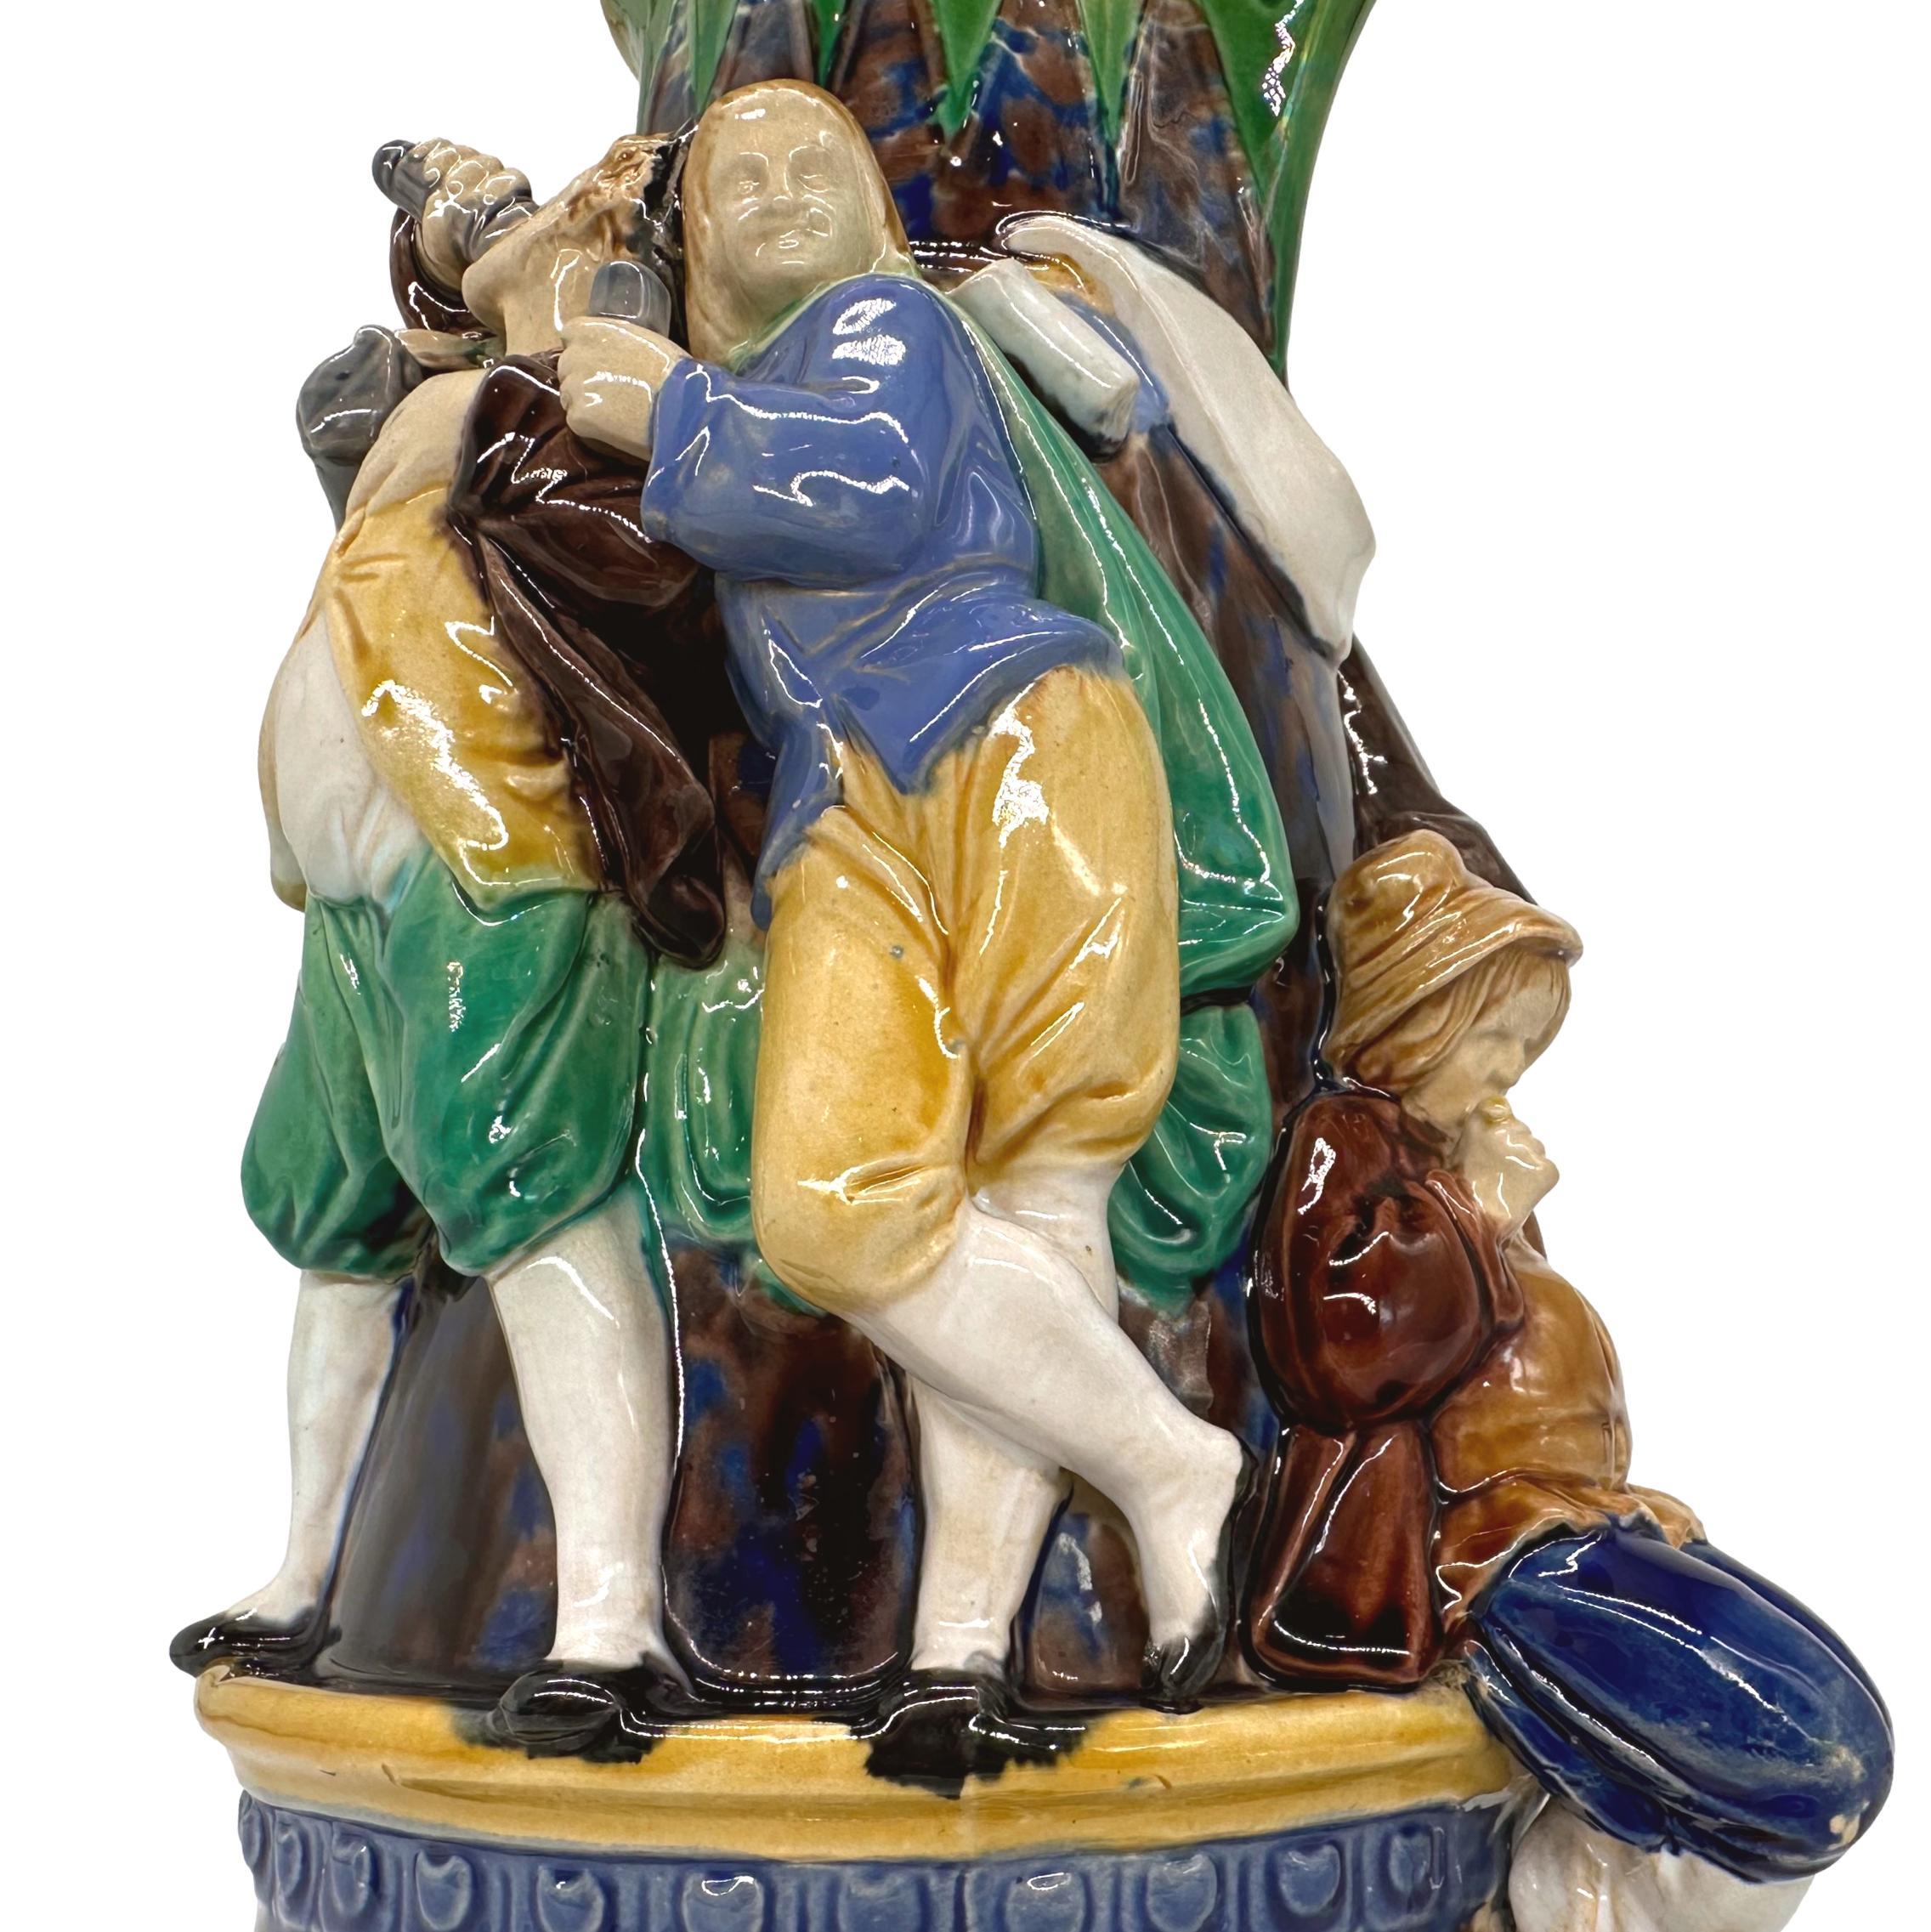 A Minton Majolica Ale Jug with Five Revelers in Medieval Dress, dated 1862 For Sale 2